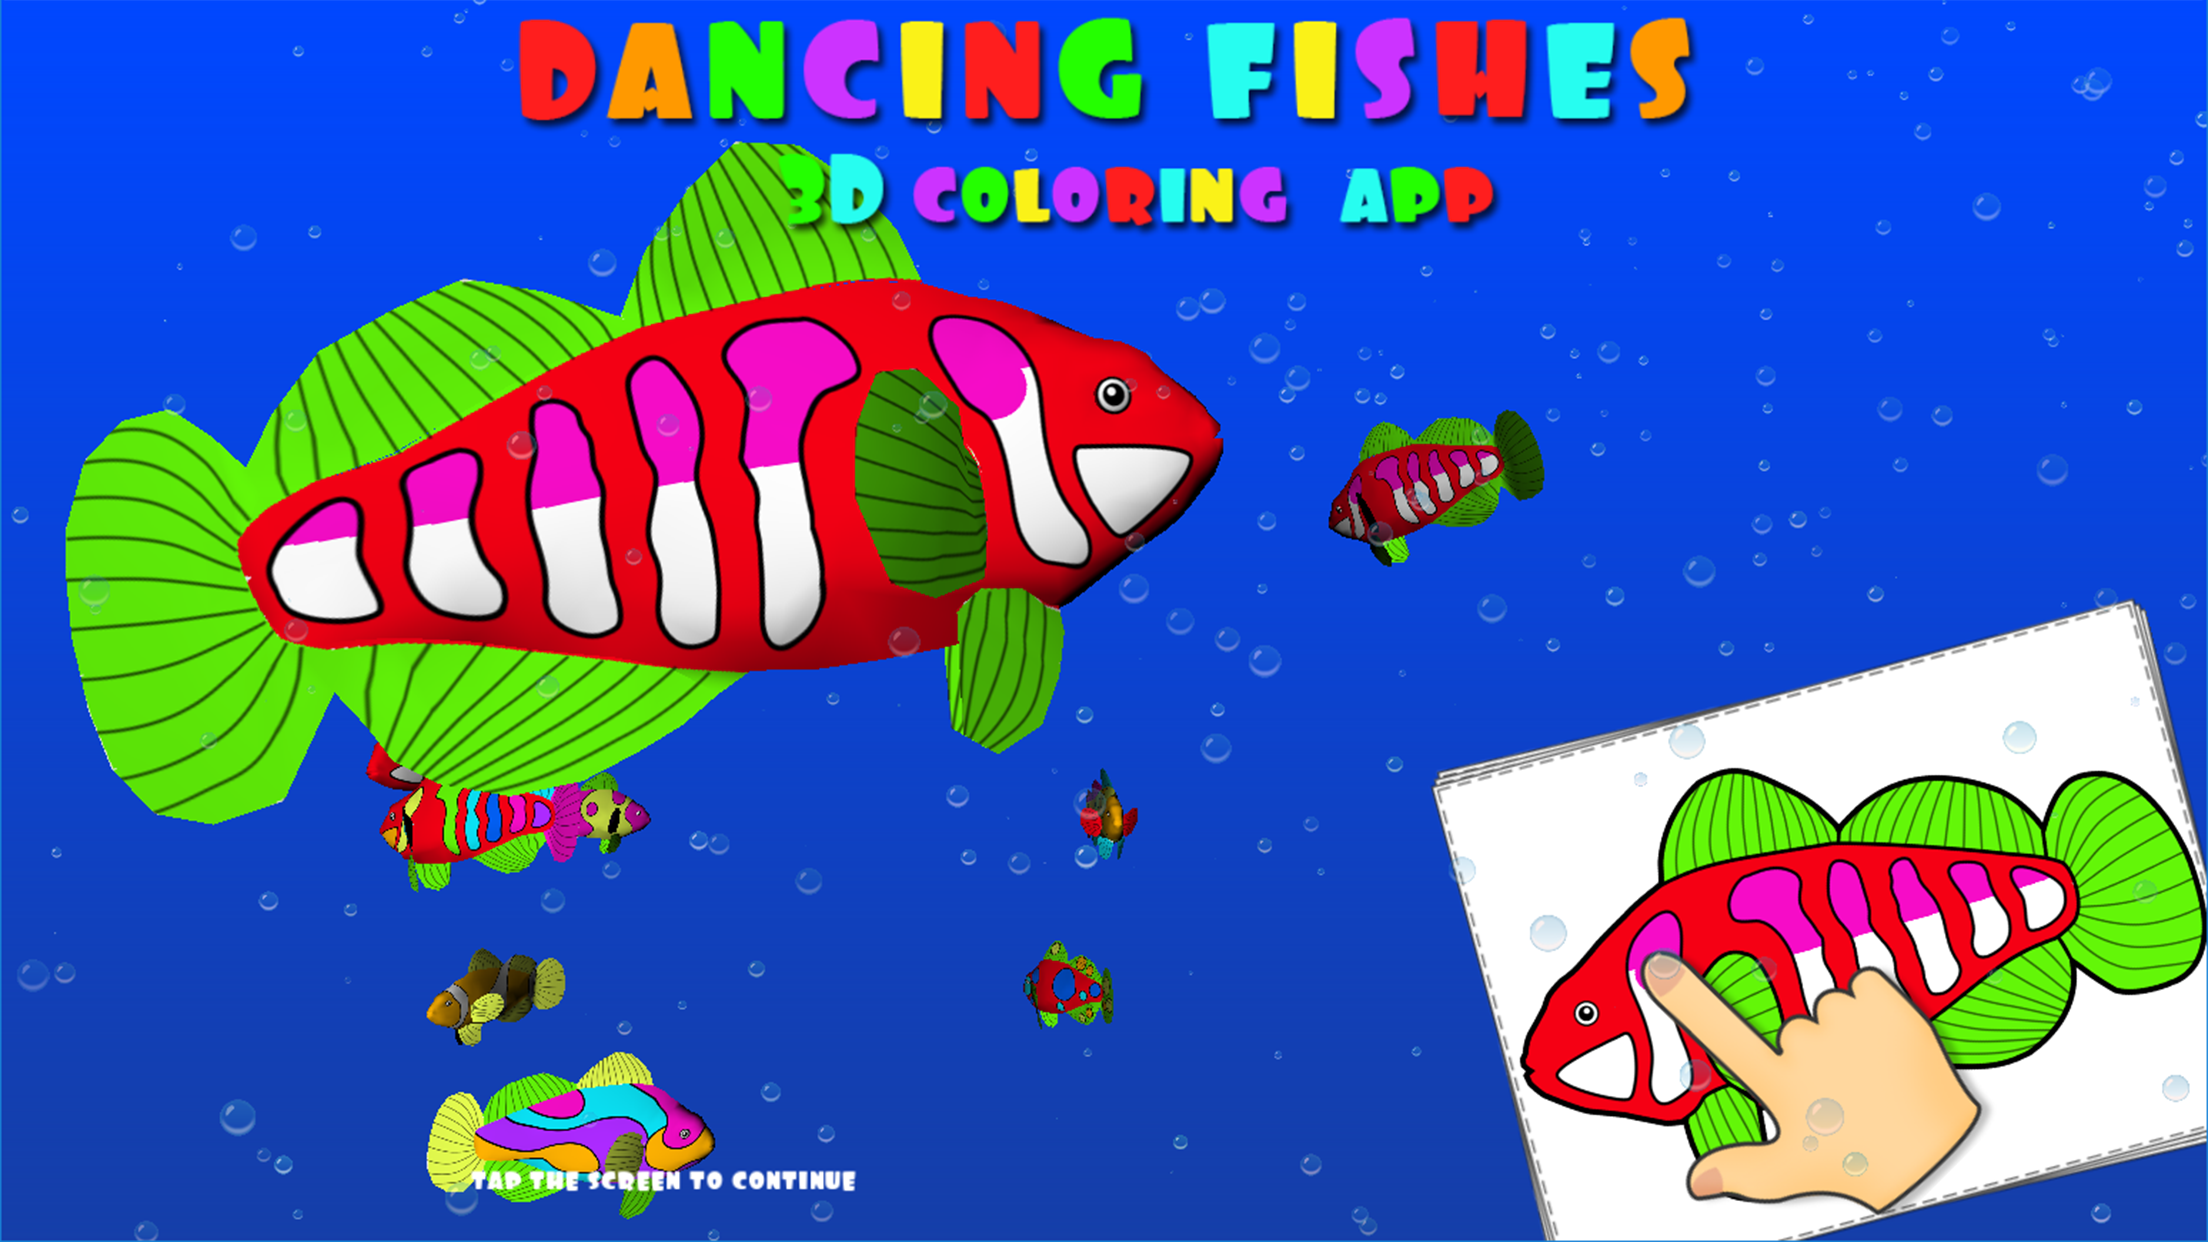 Android application Dancing fishes 3D Coloring App screenshort